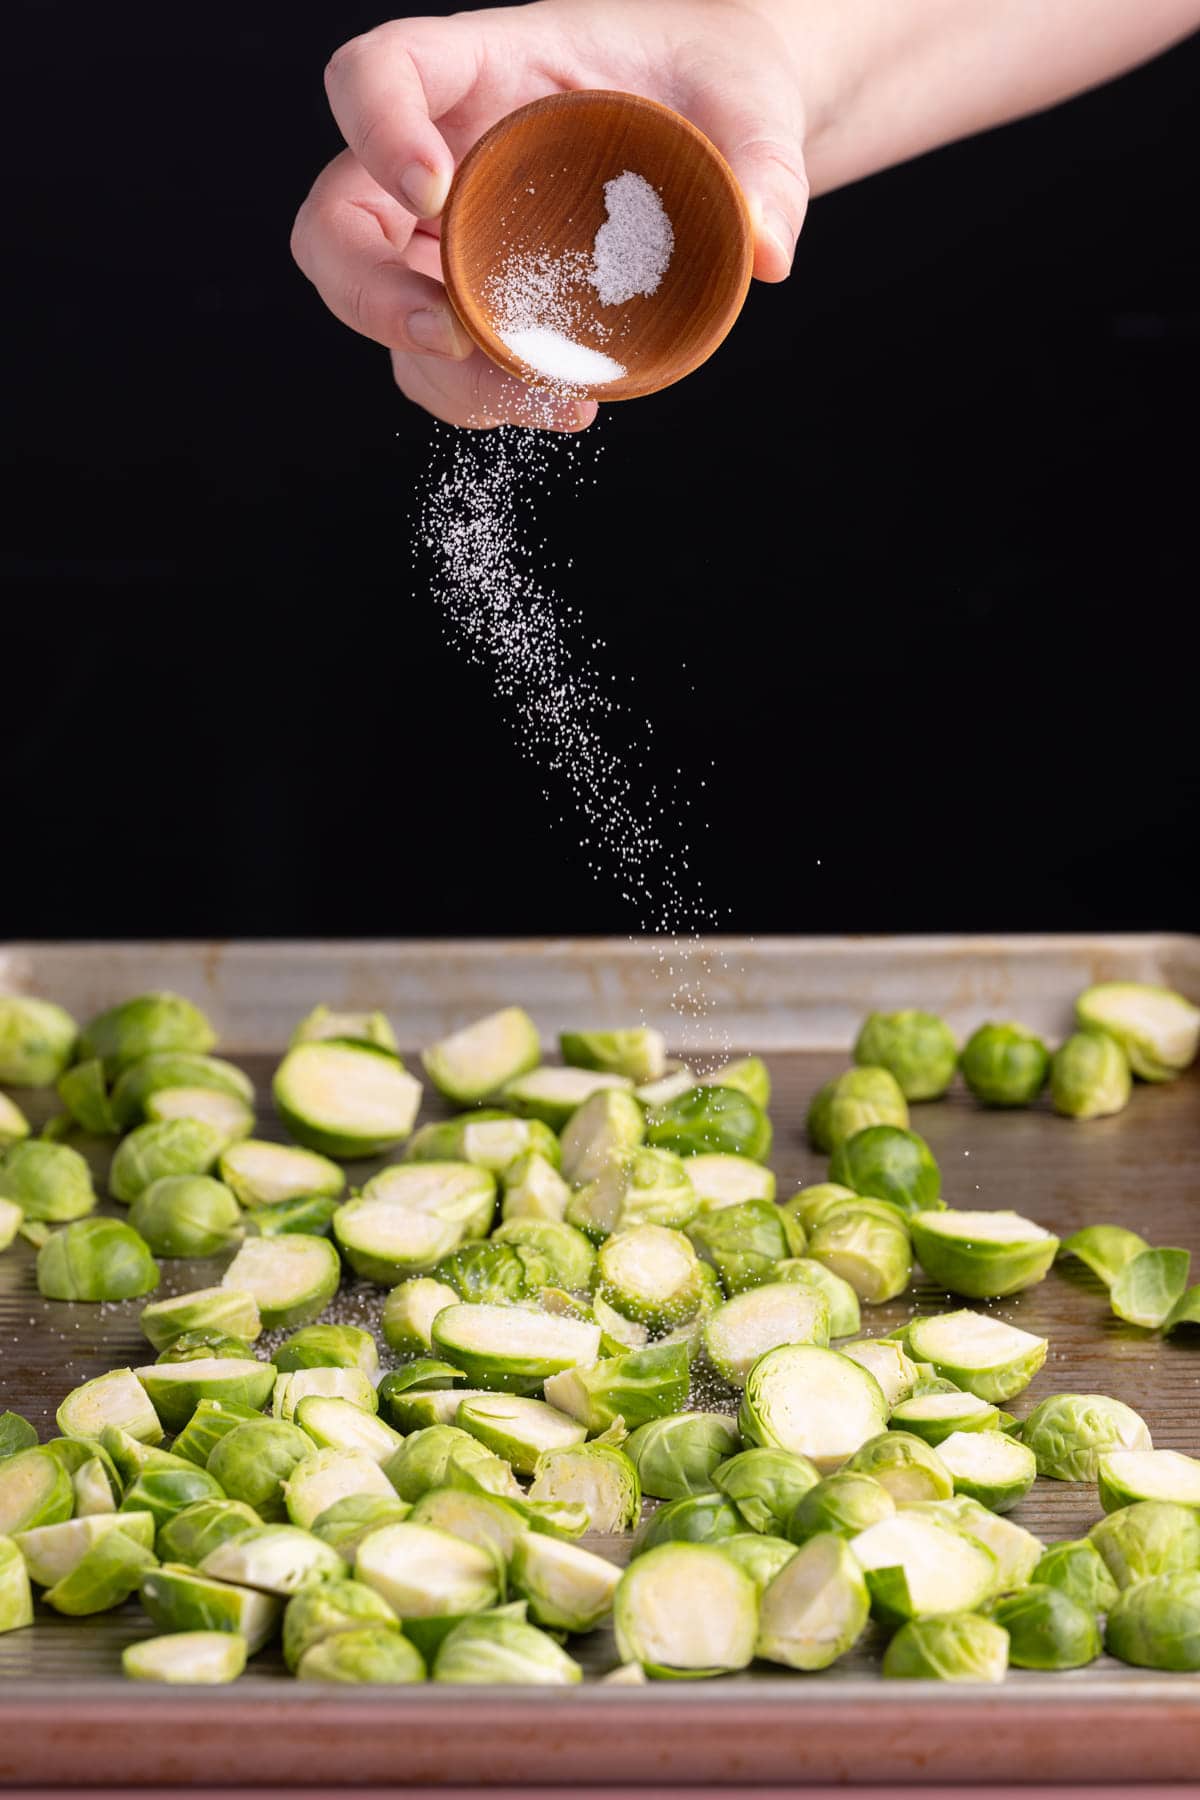 Adding seasoning to brussels sprouts on a baking tray.